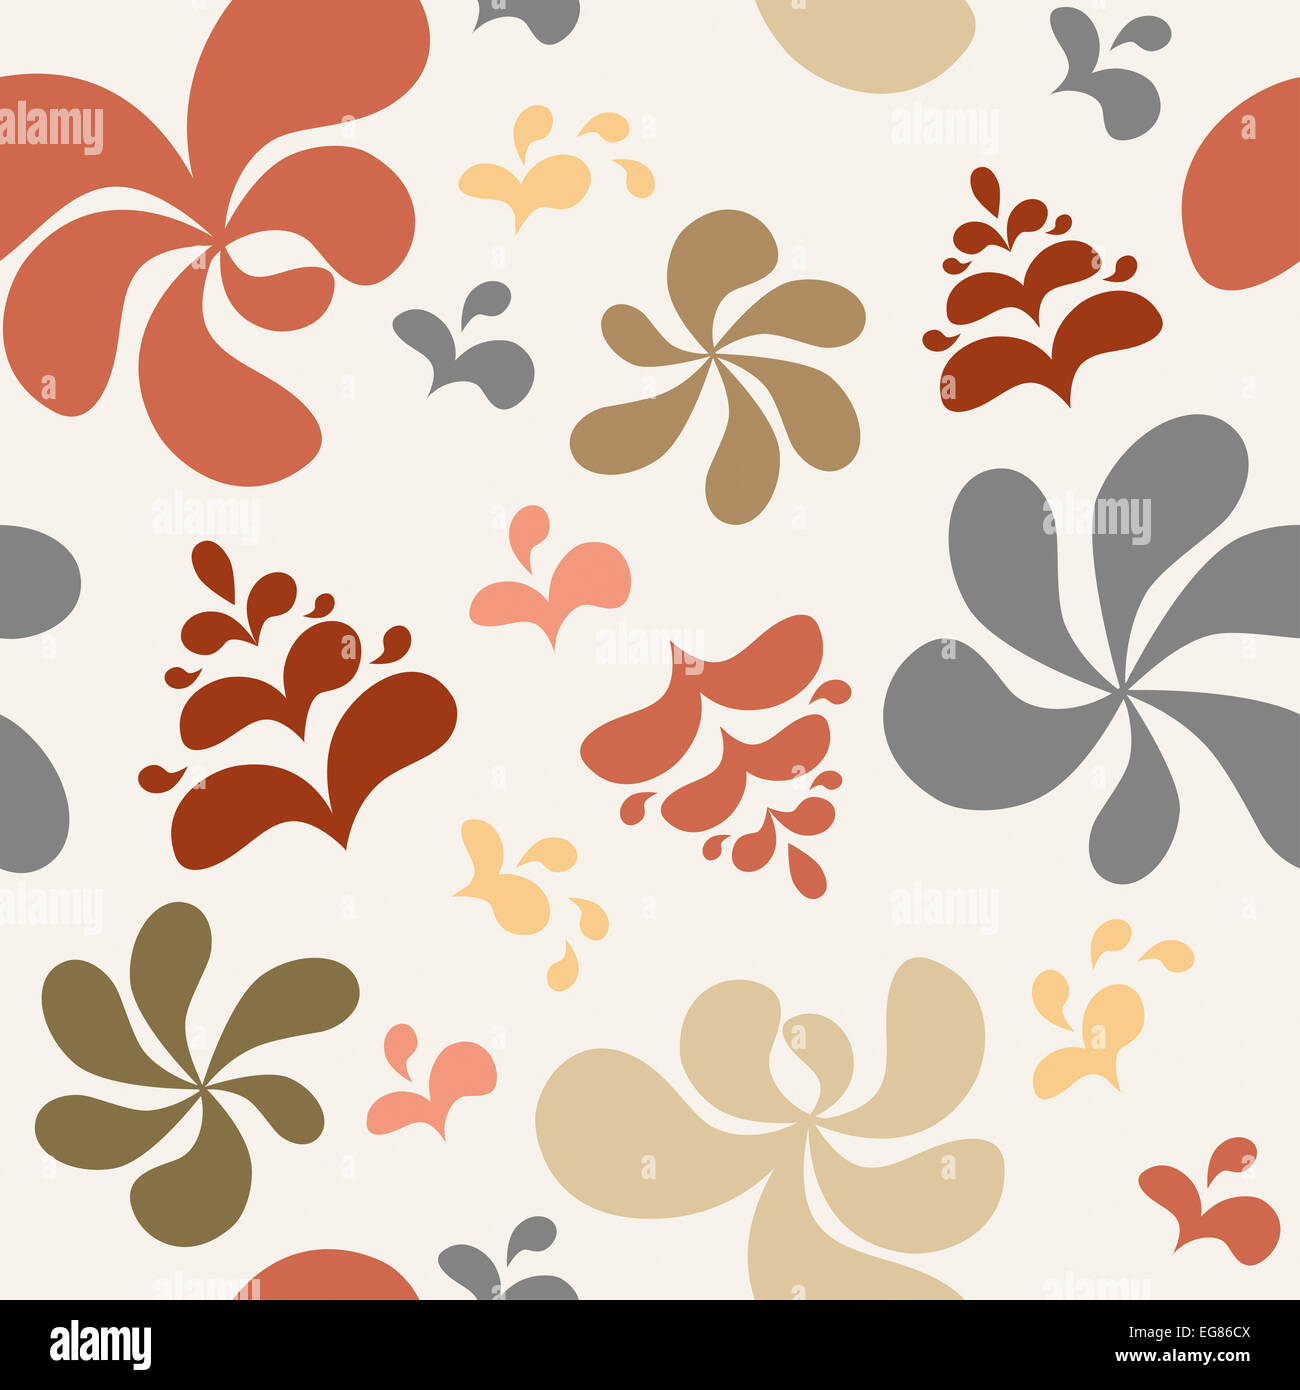 Abstract colorful floral background, seamless pattern. Raster illustration. Stock Photo